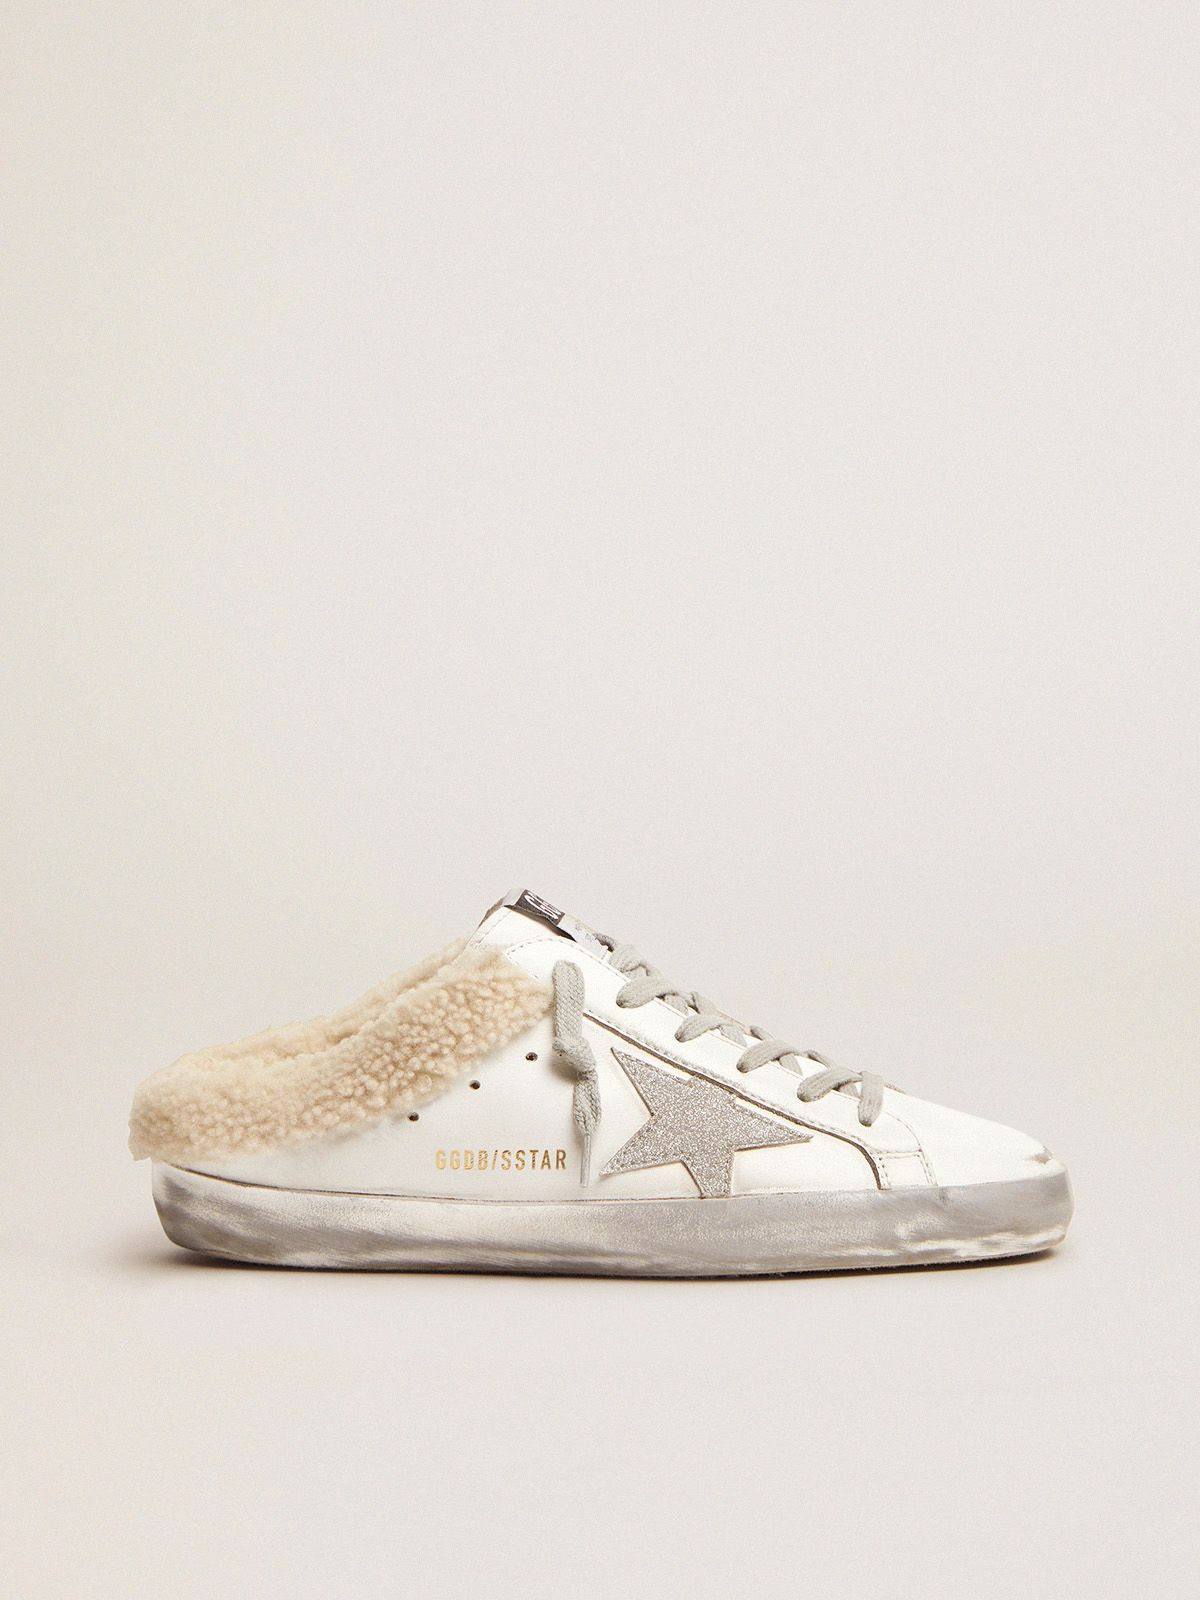 Super-Star Sabots in white leather with shearling lining